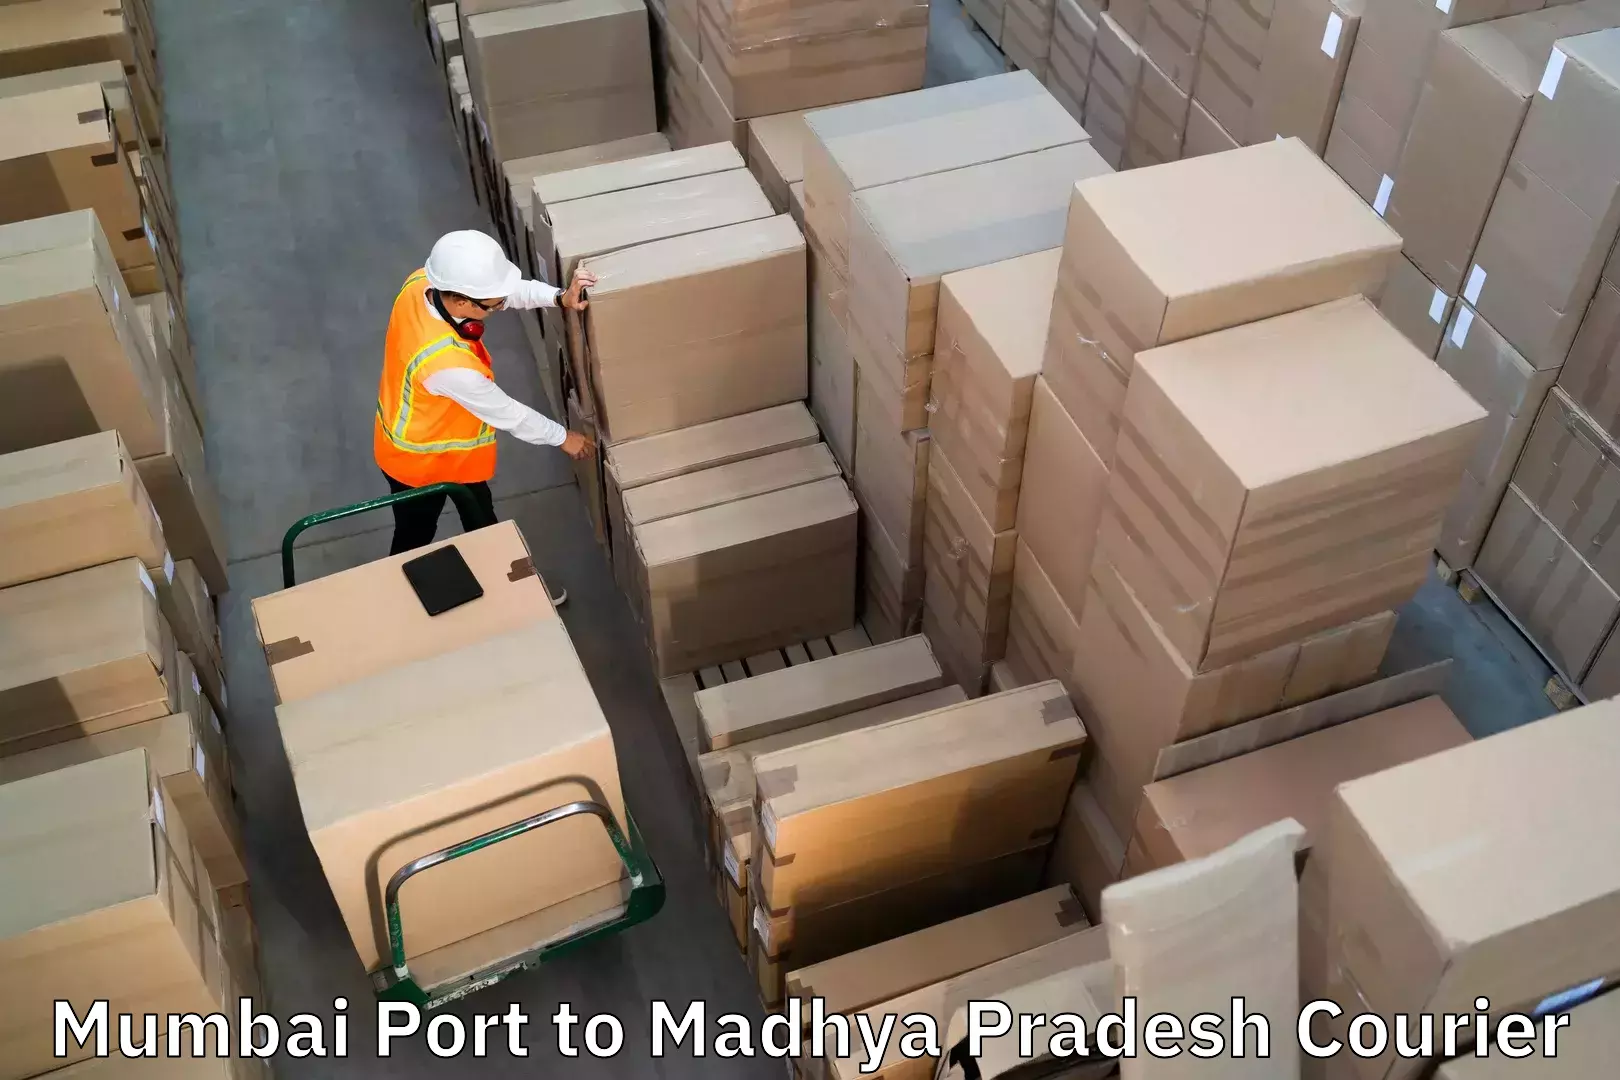 Baggage transport services Mumbai Port to IIT Indore